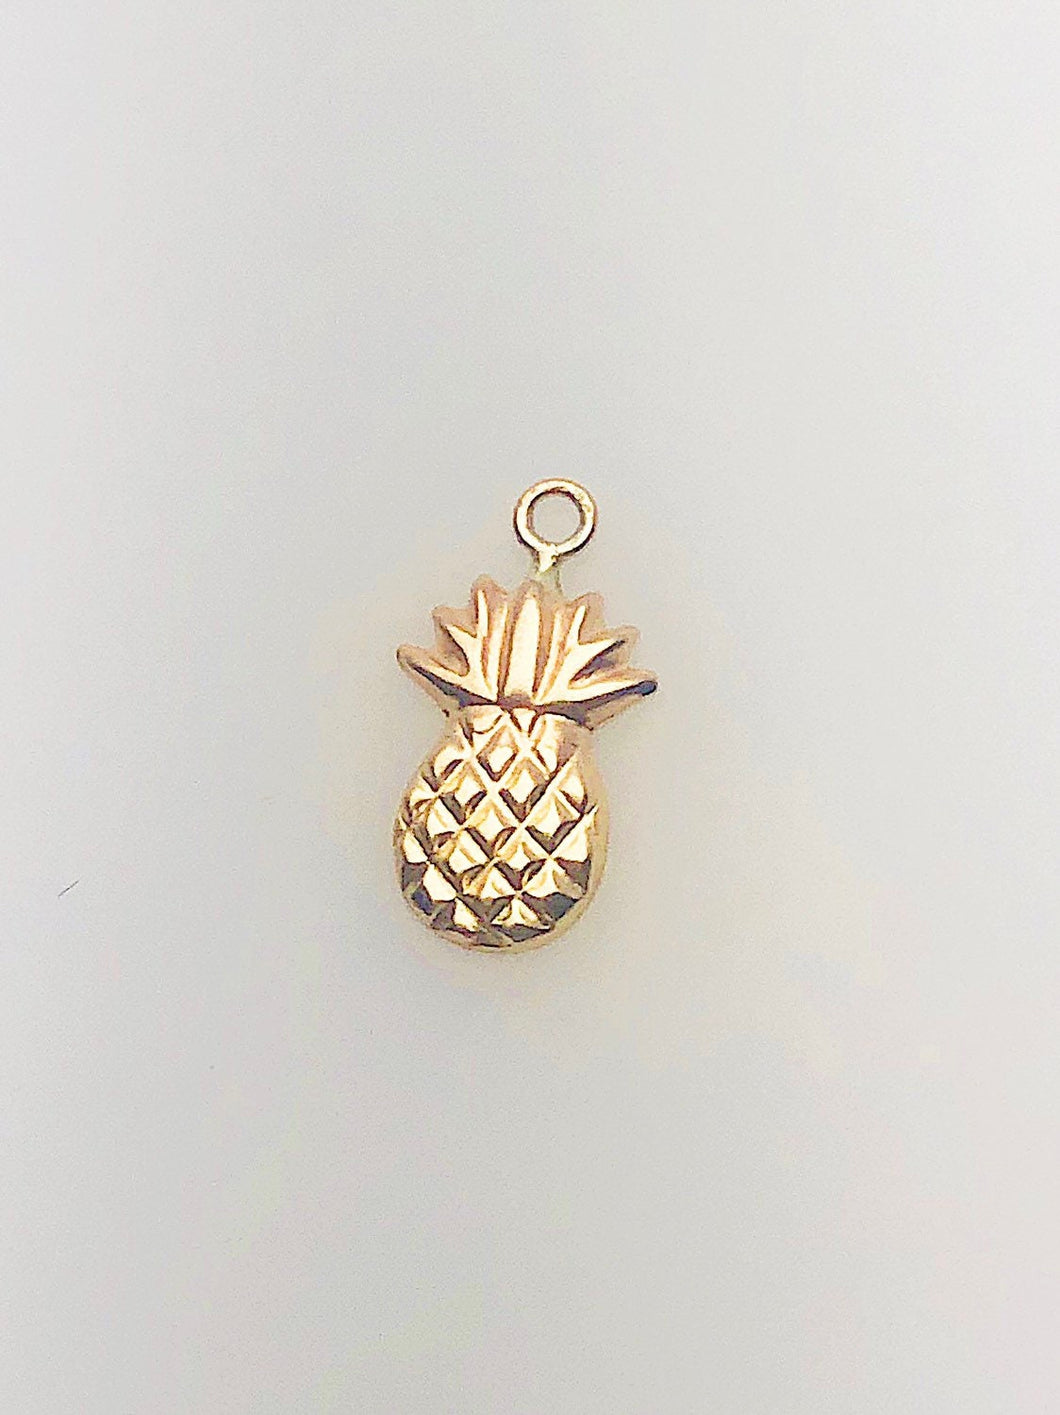 14K Gold Fill Pineapple Charm w/ Ring, 7.0x12.7mm, Made in USA - 1161 J/R